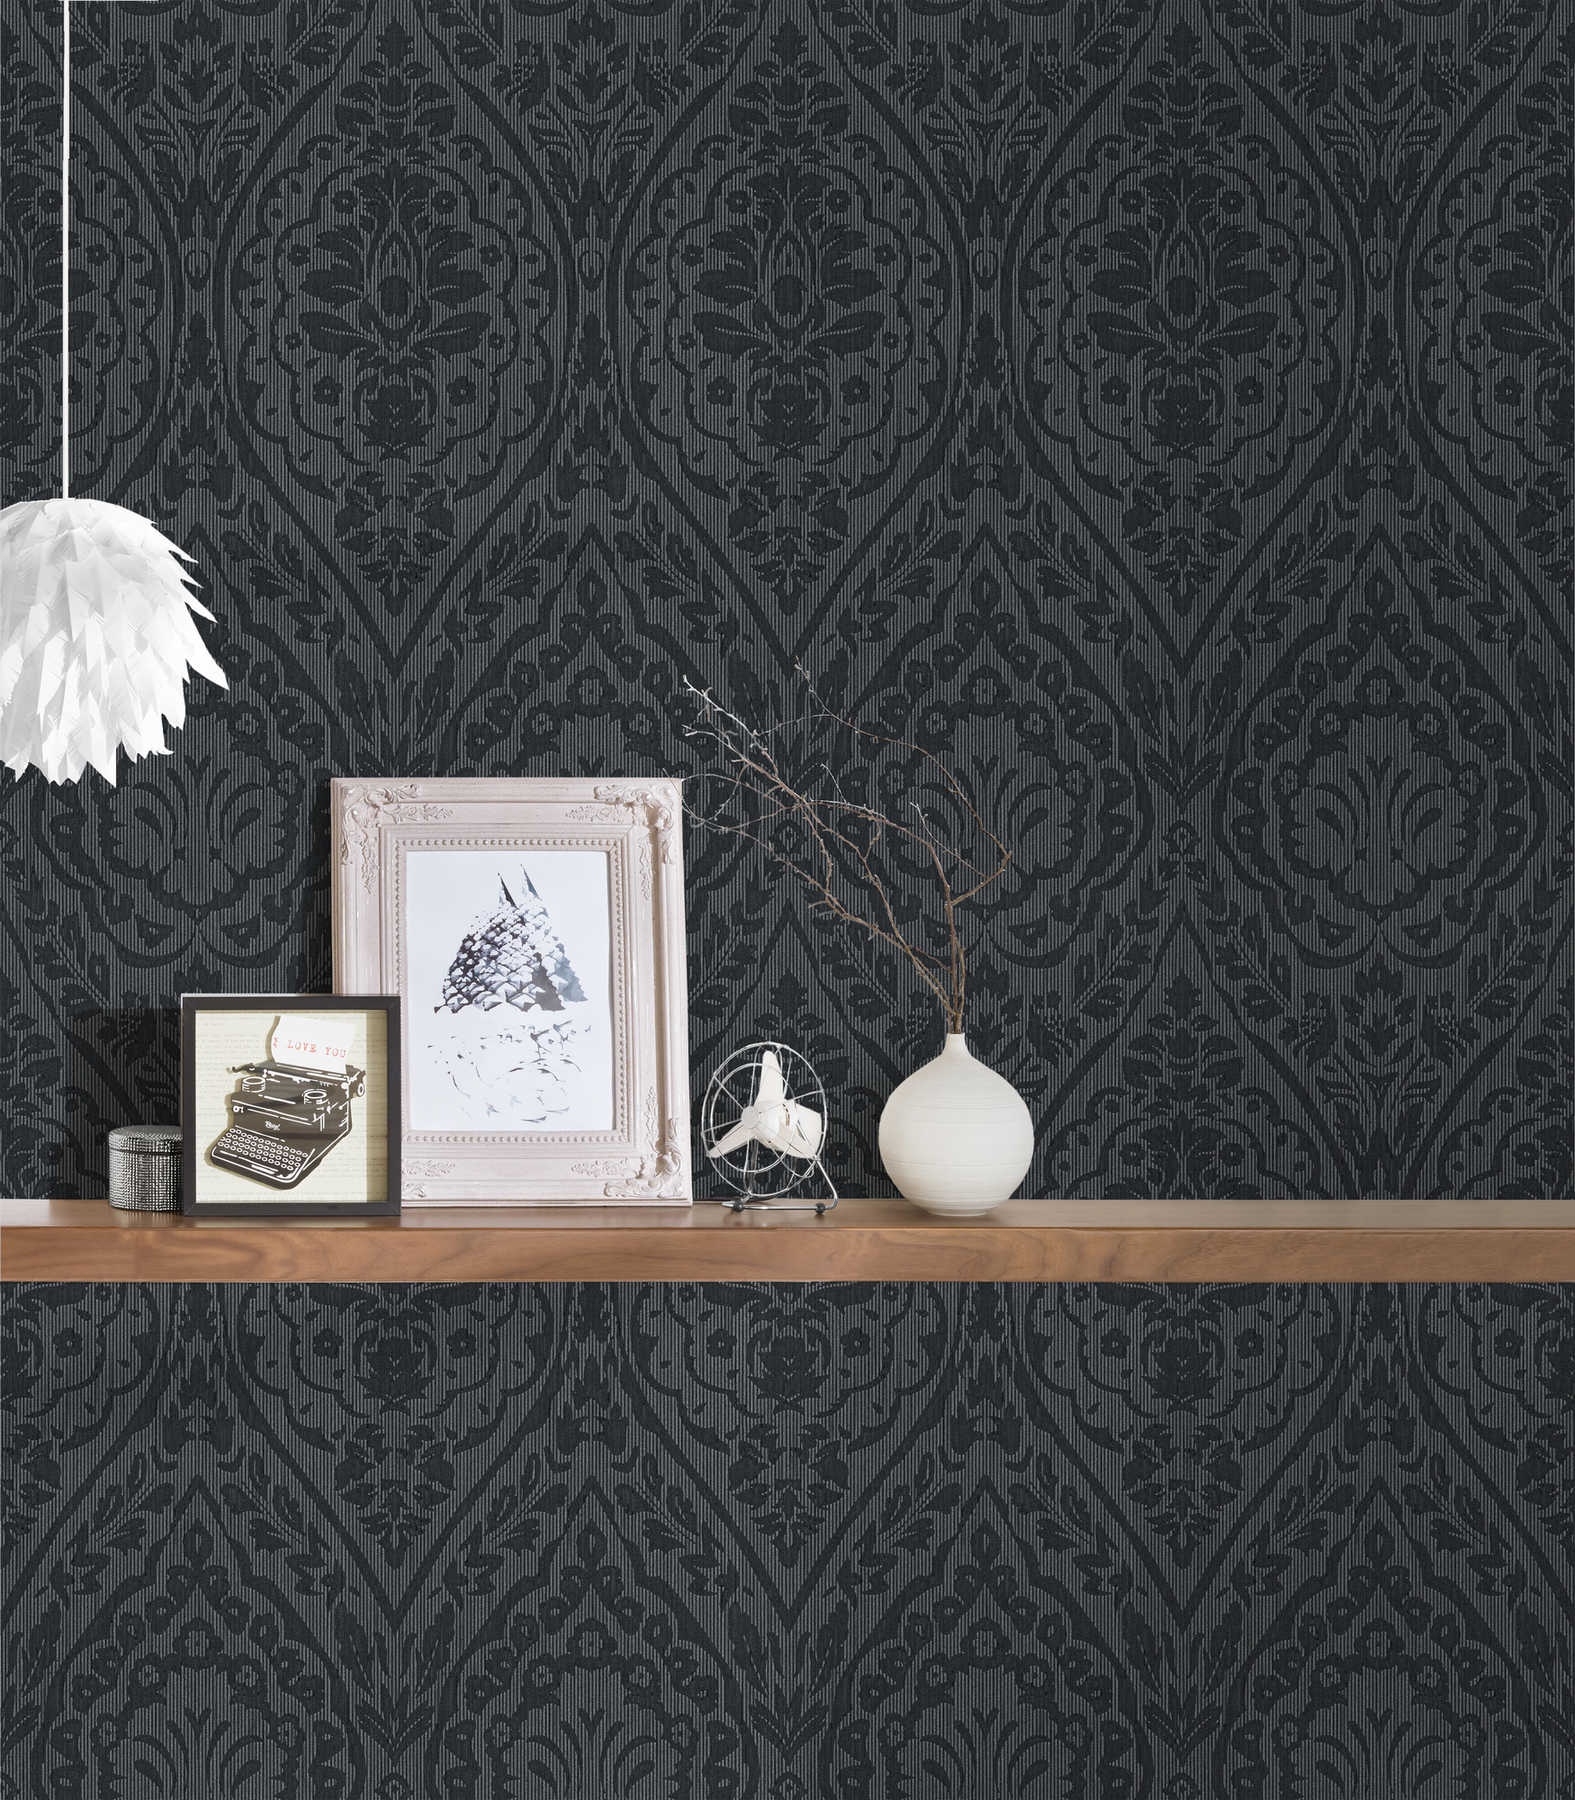             Floral ornament wallpaper in colonial style - grey, black
        